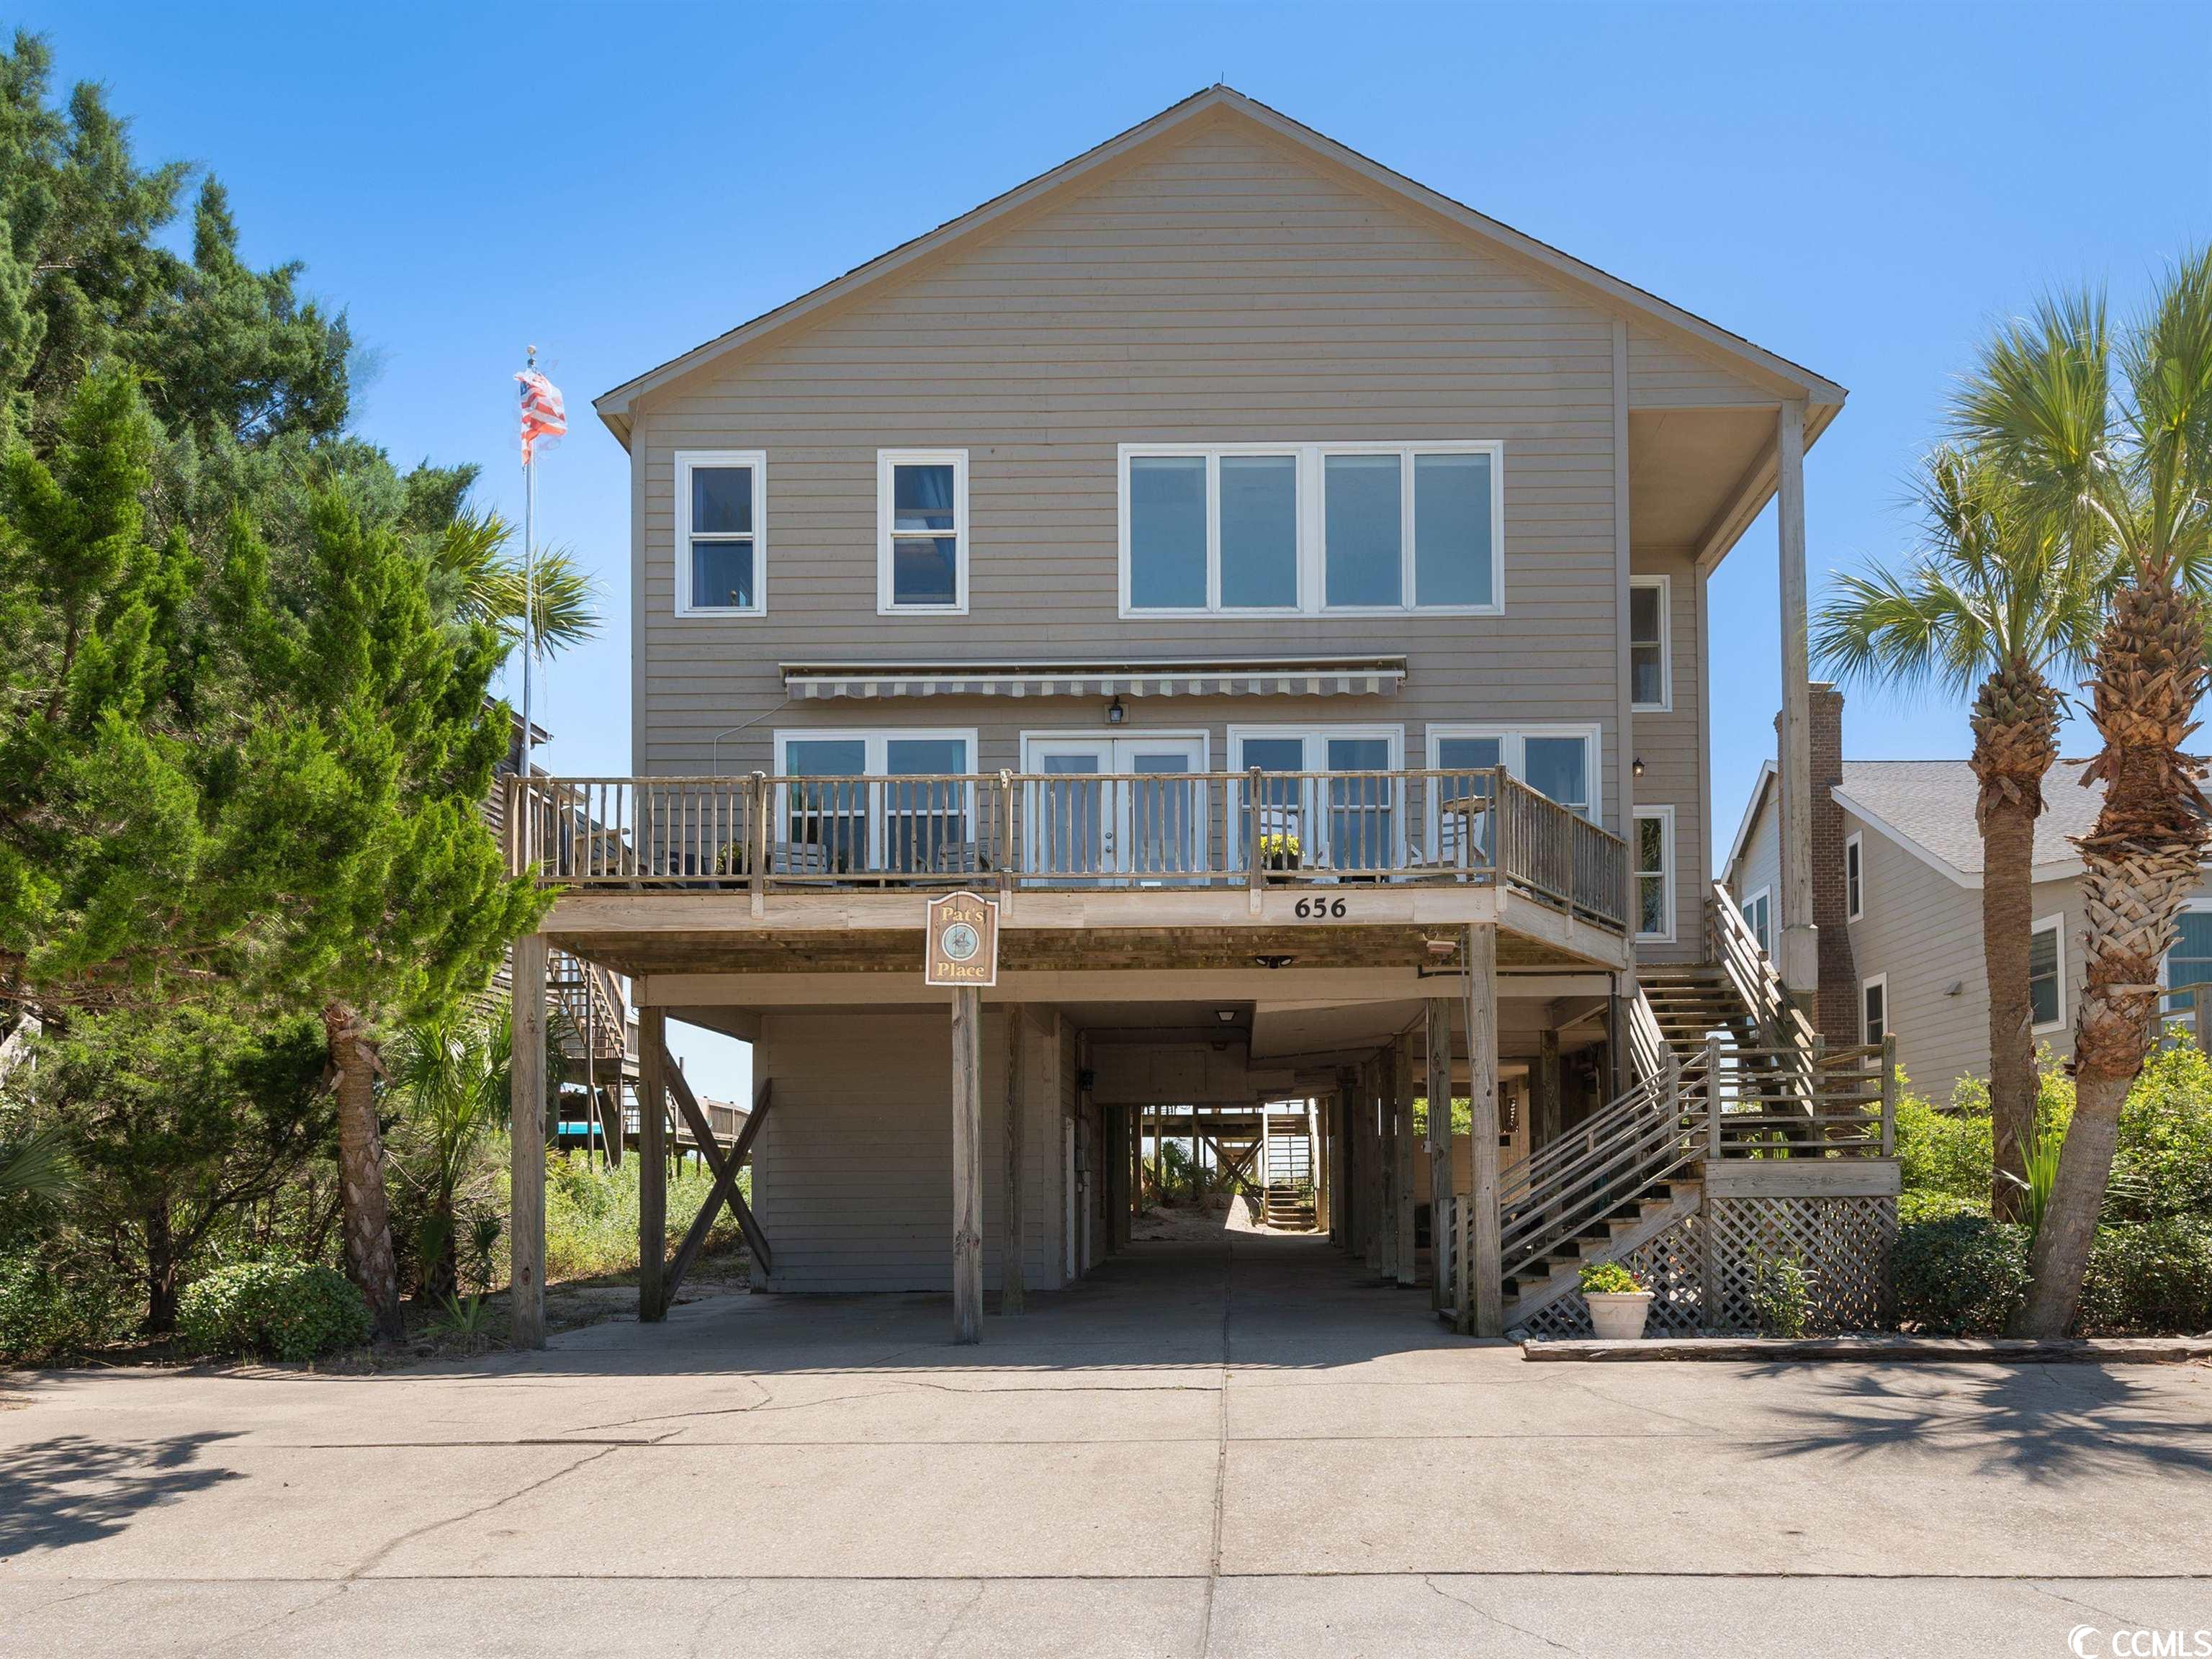 this home is pawleys island. no chandeliers or ultra-modern furnishings. a beach home the way they were meant to be. it's located ocean front and creek front with a dock. this 7 bedroom, 4.5 bath residence sleeps 20 and would be great for a large family getaway or as an investment / rental income property. other home features include a large game room with an incredible ocean view along with a multi volume library. the massive kitchen was designed to handle the largest of gatherings.  there are 2 dishwashers, 2 refrigerators, a stove / range and an additional under-countertop jenn-aire range. there's parking for about 8 cars, along with 2 beach showers and a fish cleaning station underneath the home. the back screened porch has room for relaxing or enjoying your breakfast; or when you have nap time there's no place better than in the pawleys island rope hammock. from there you spend a few minutes listening to the waves pounding on the shore; but then... "night night". there is an elevator for easy accessibility. the homes front porch is the perfect spot to enjoy a glass of wine and watch the sunset after a hard day in your beach chair. ready for some flounder and crab? the creek dock gives you a great place to catch them. it also provides you a place to tie off your jon boat and jet ski. the description of this wonderful home could continue, but it's better to see it for yourself. make plans to see 656 springs avenue as soon as possible.